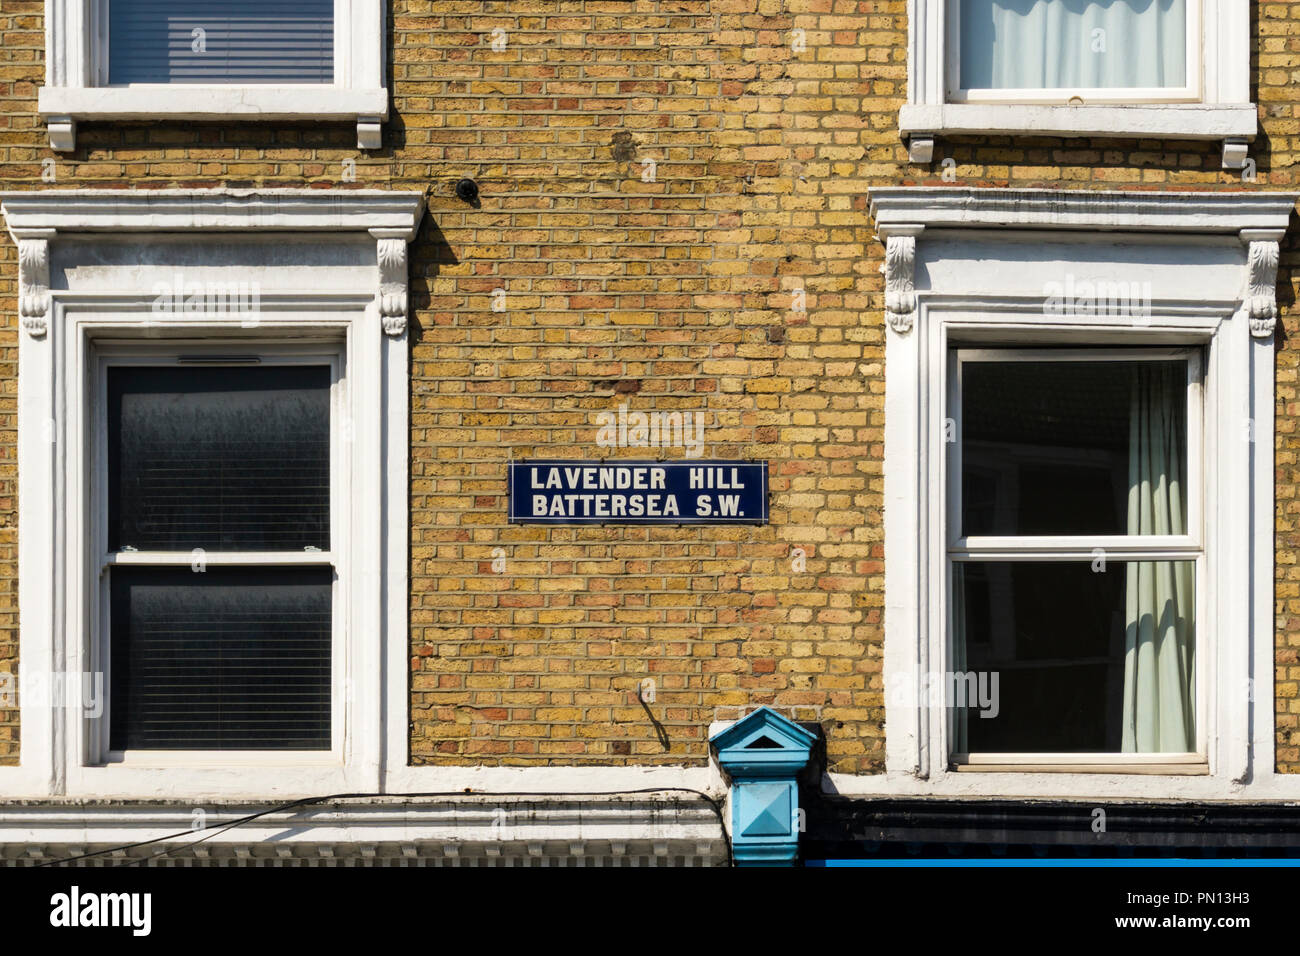 An old street sign for Lavender Hill, Battersea S.W. in South London. Stock Photo